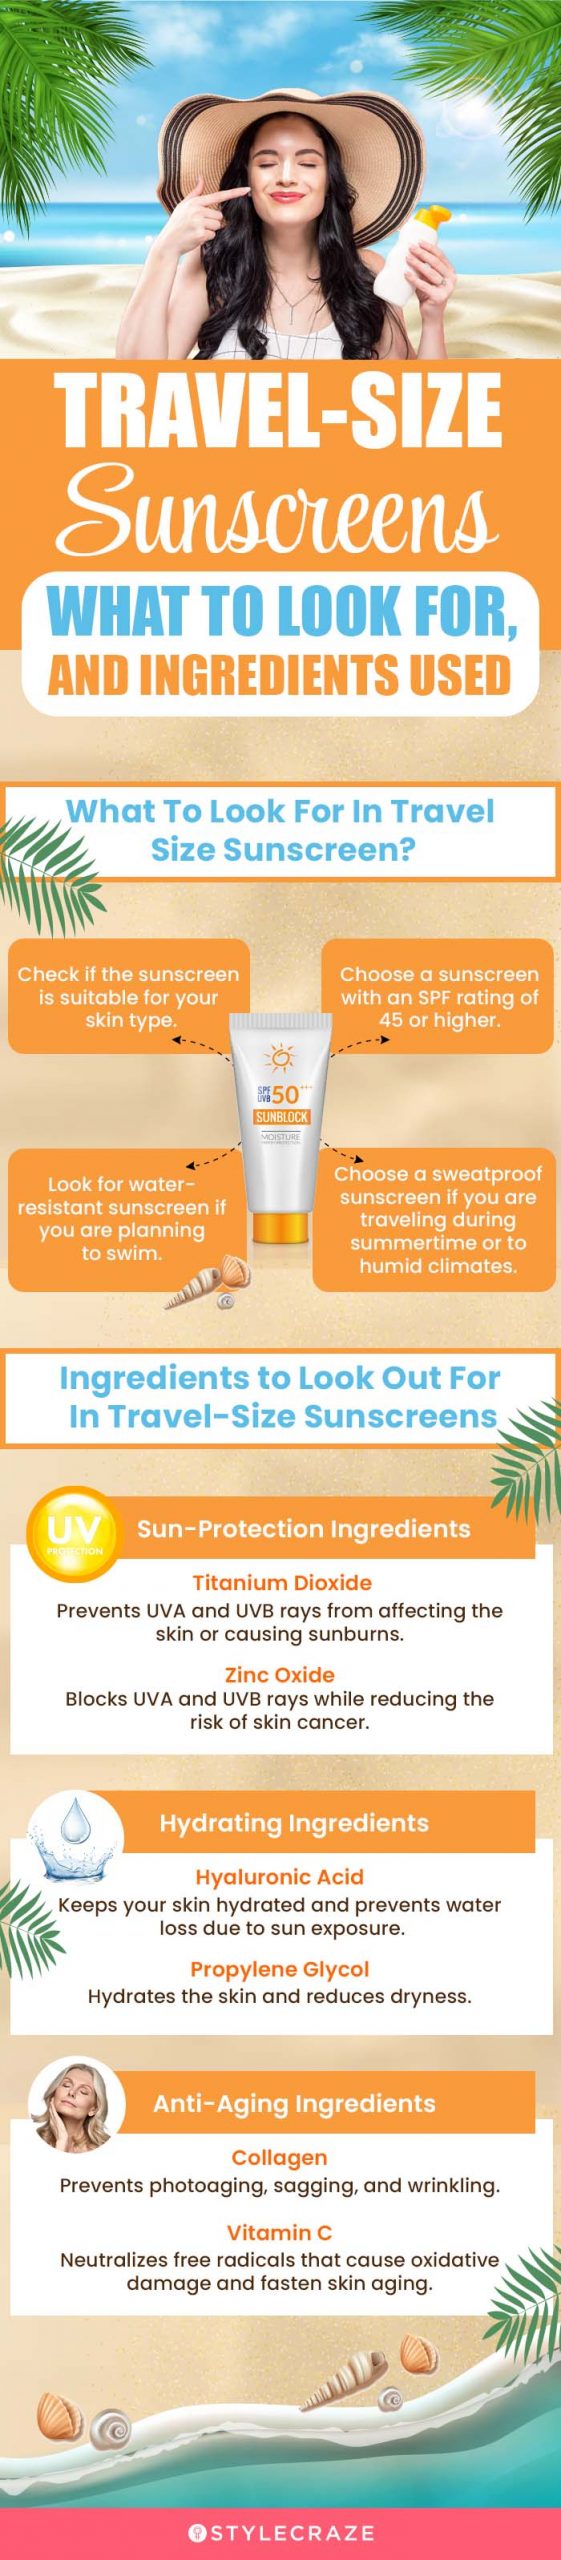 Travel-Size Sunscreens: What To Look For [infographic]